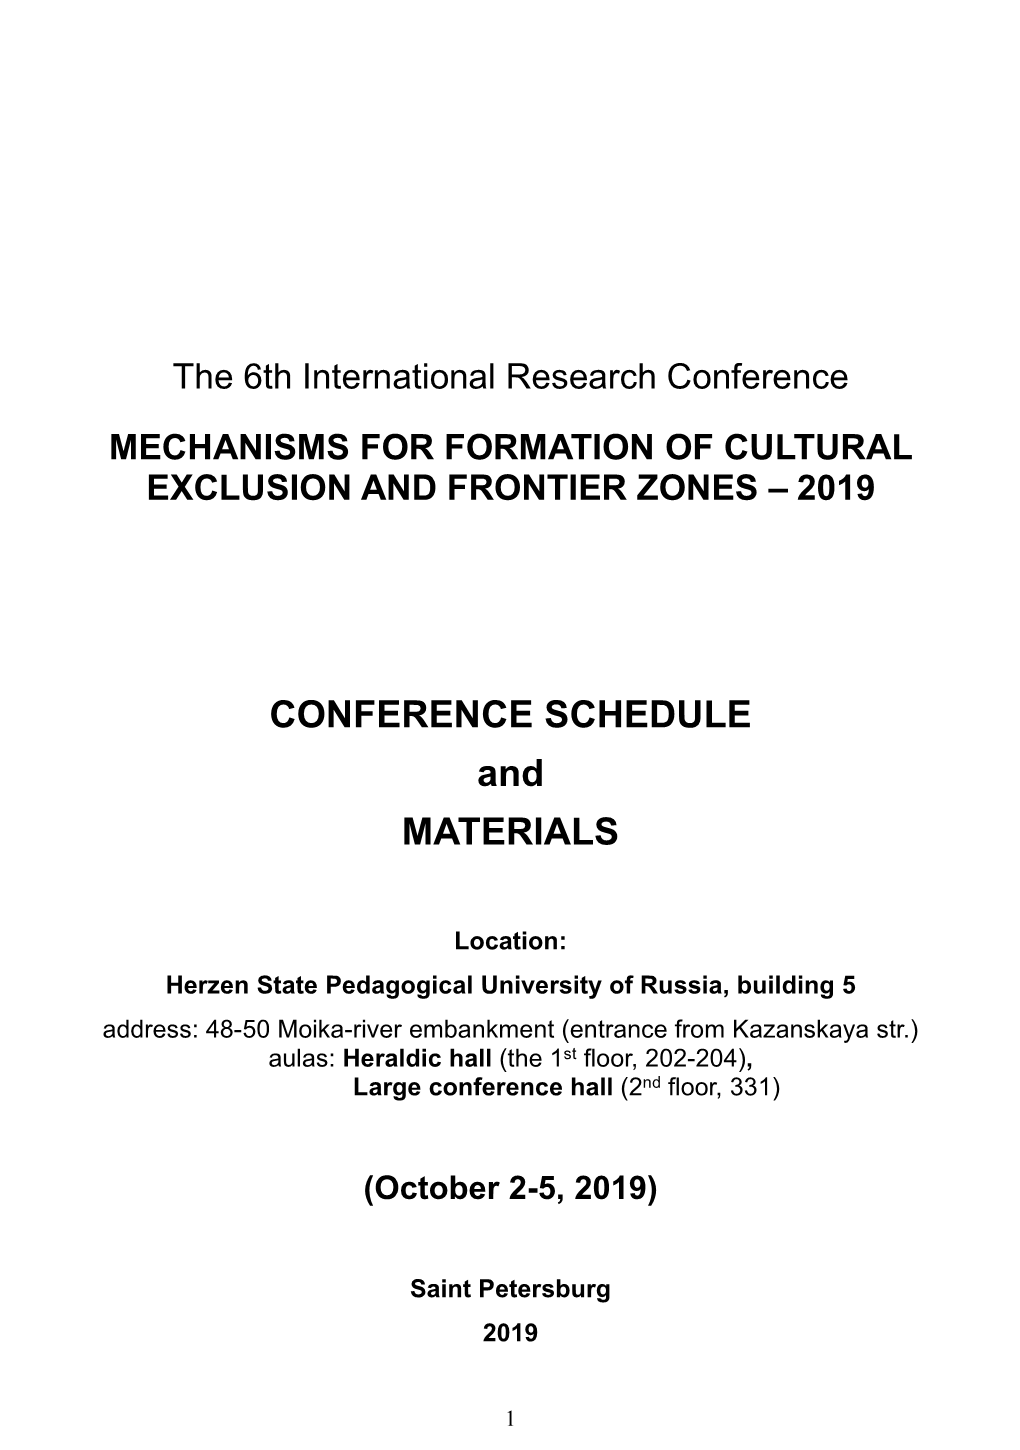 CONFERENCE SCHEDULE and MATERIALS